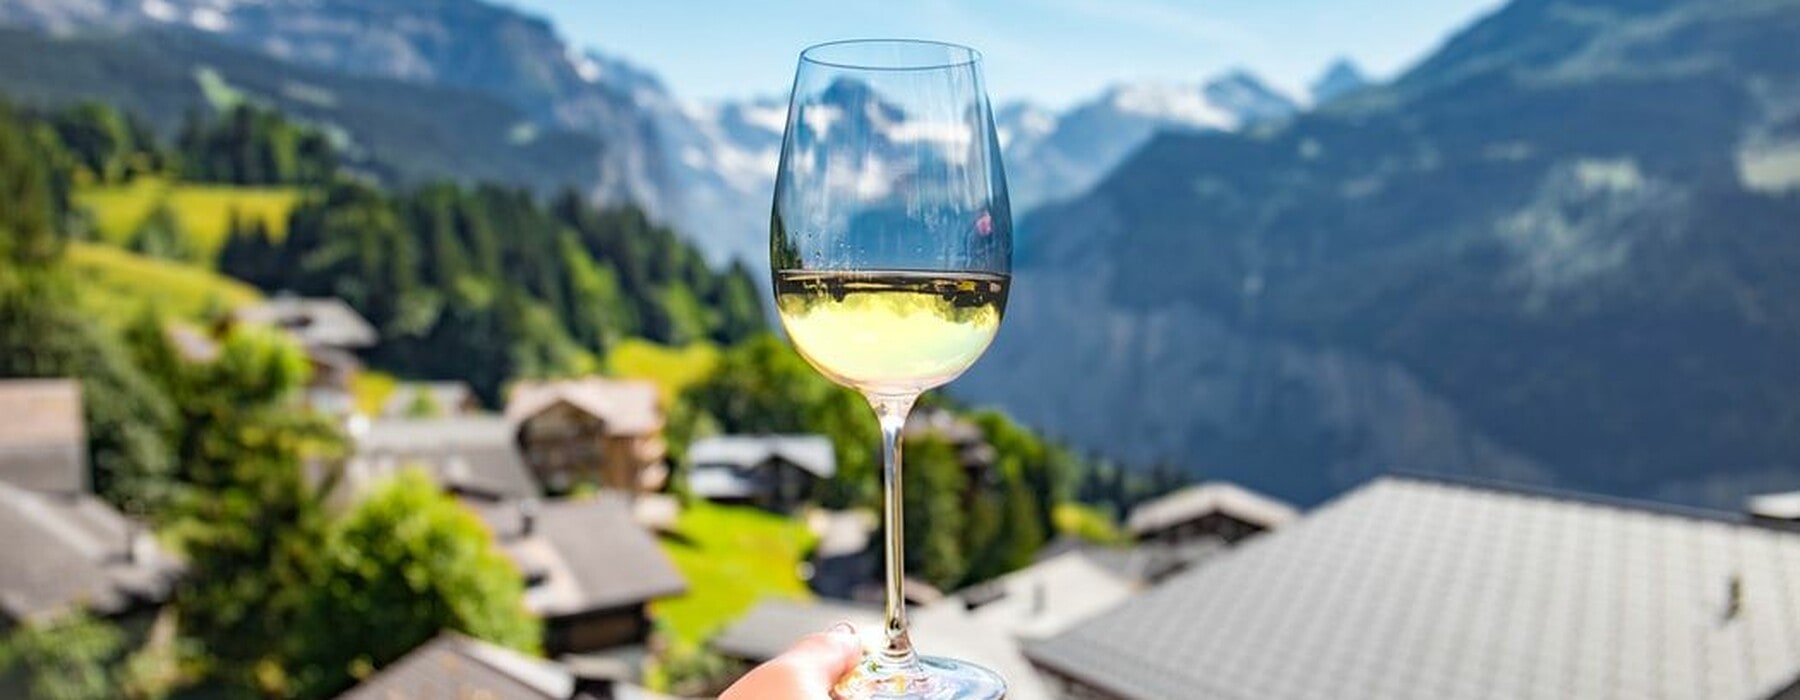 A glass of wine filled with white wine against a scenic backdrop